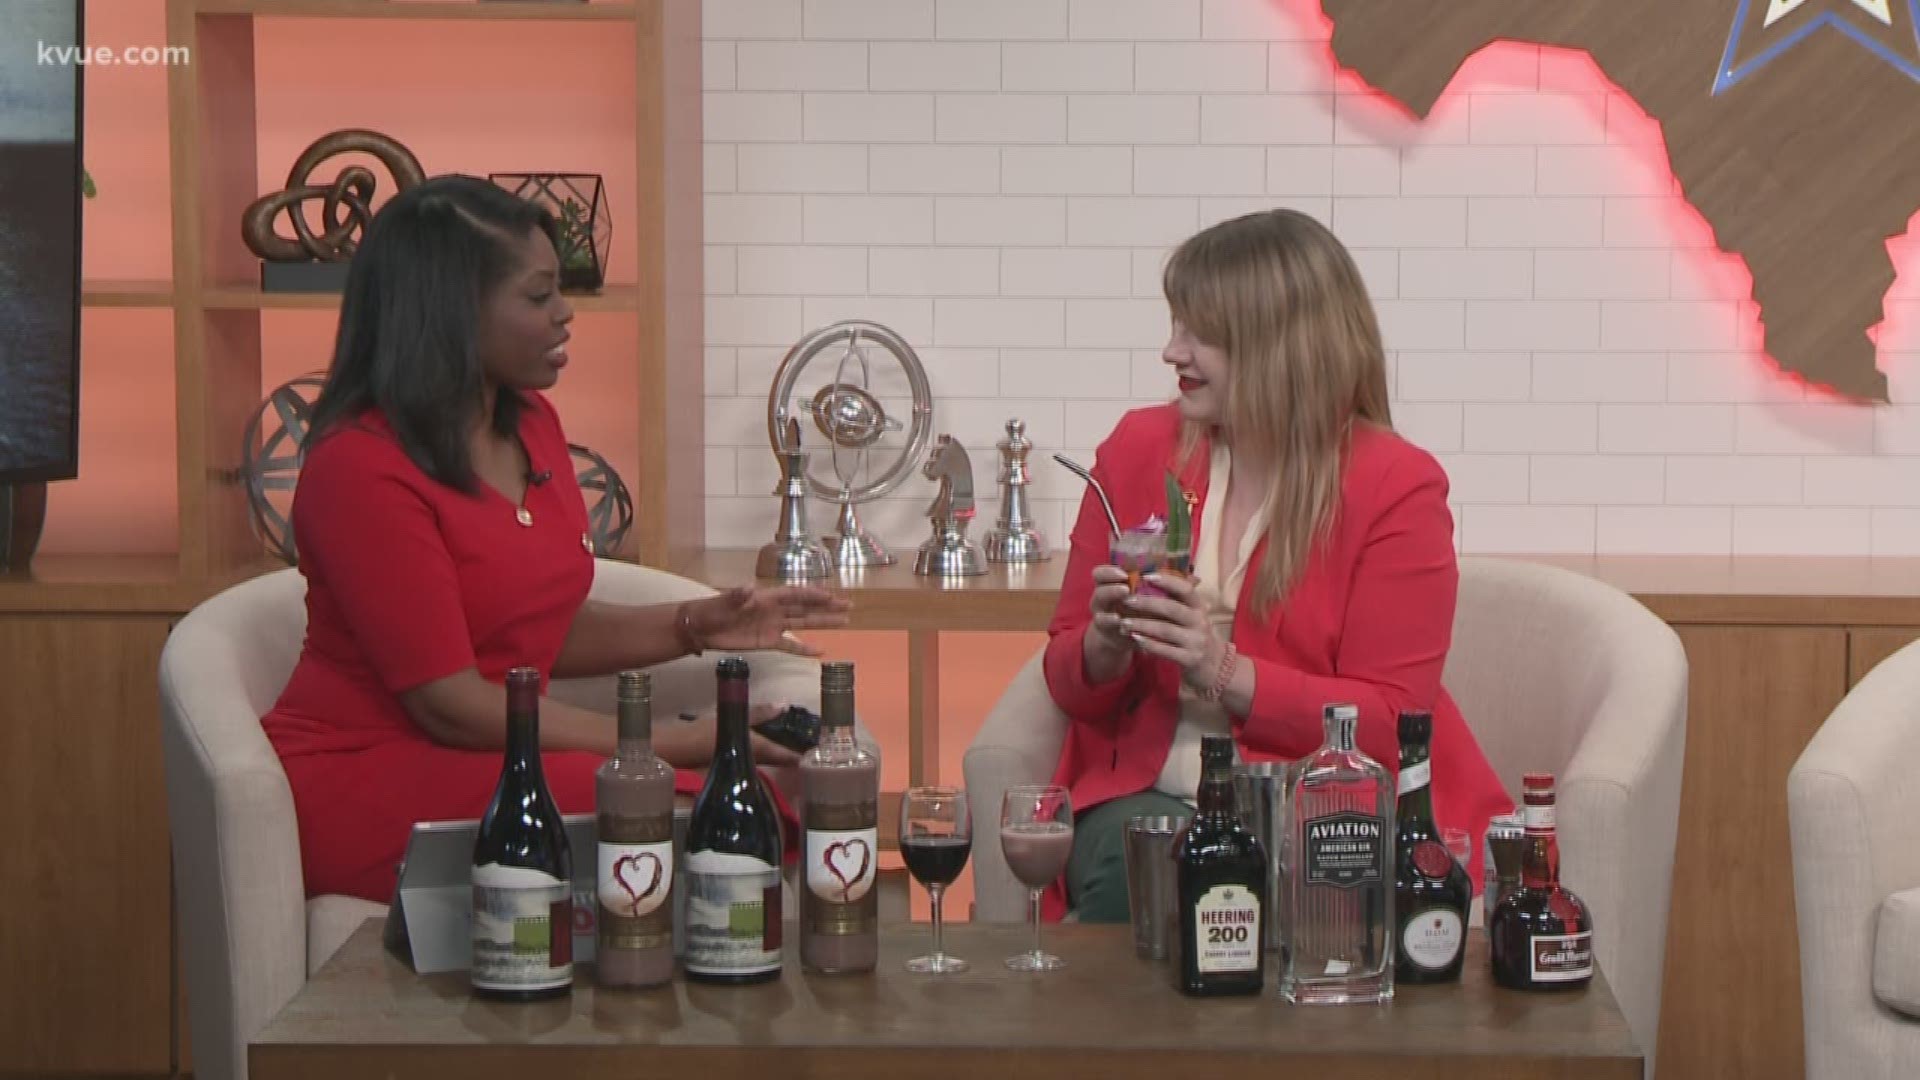 Amanda Carto with Nickel City is here to show us some great drinks for the holidays.